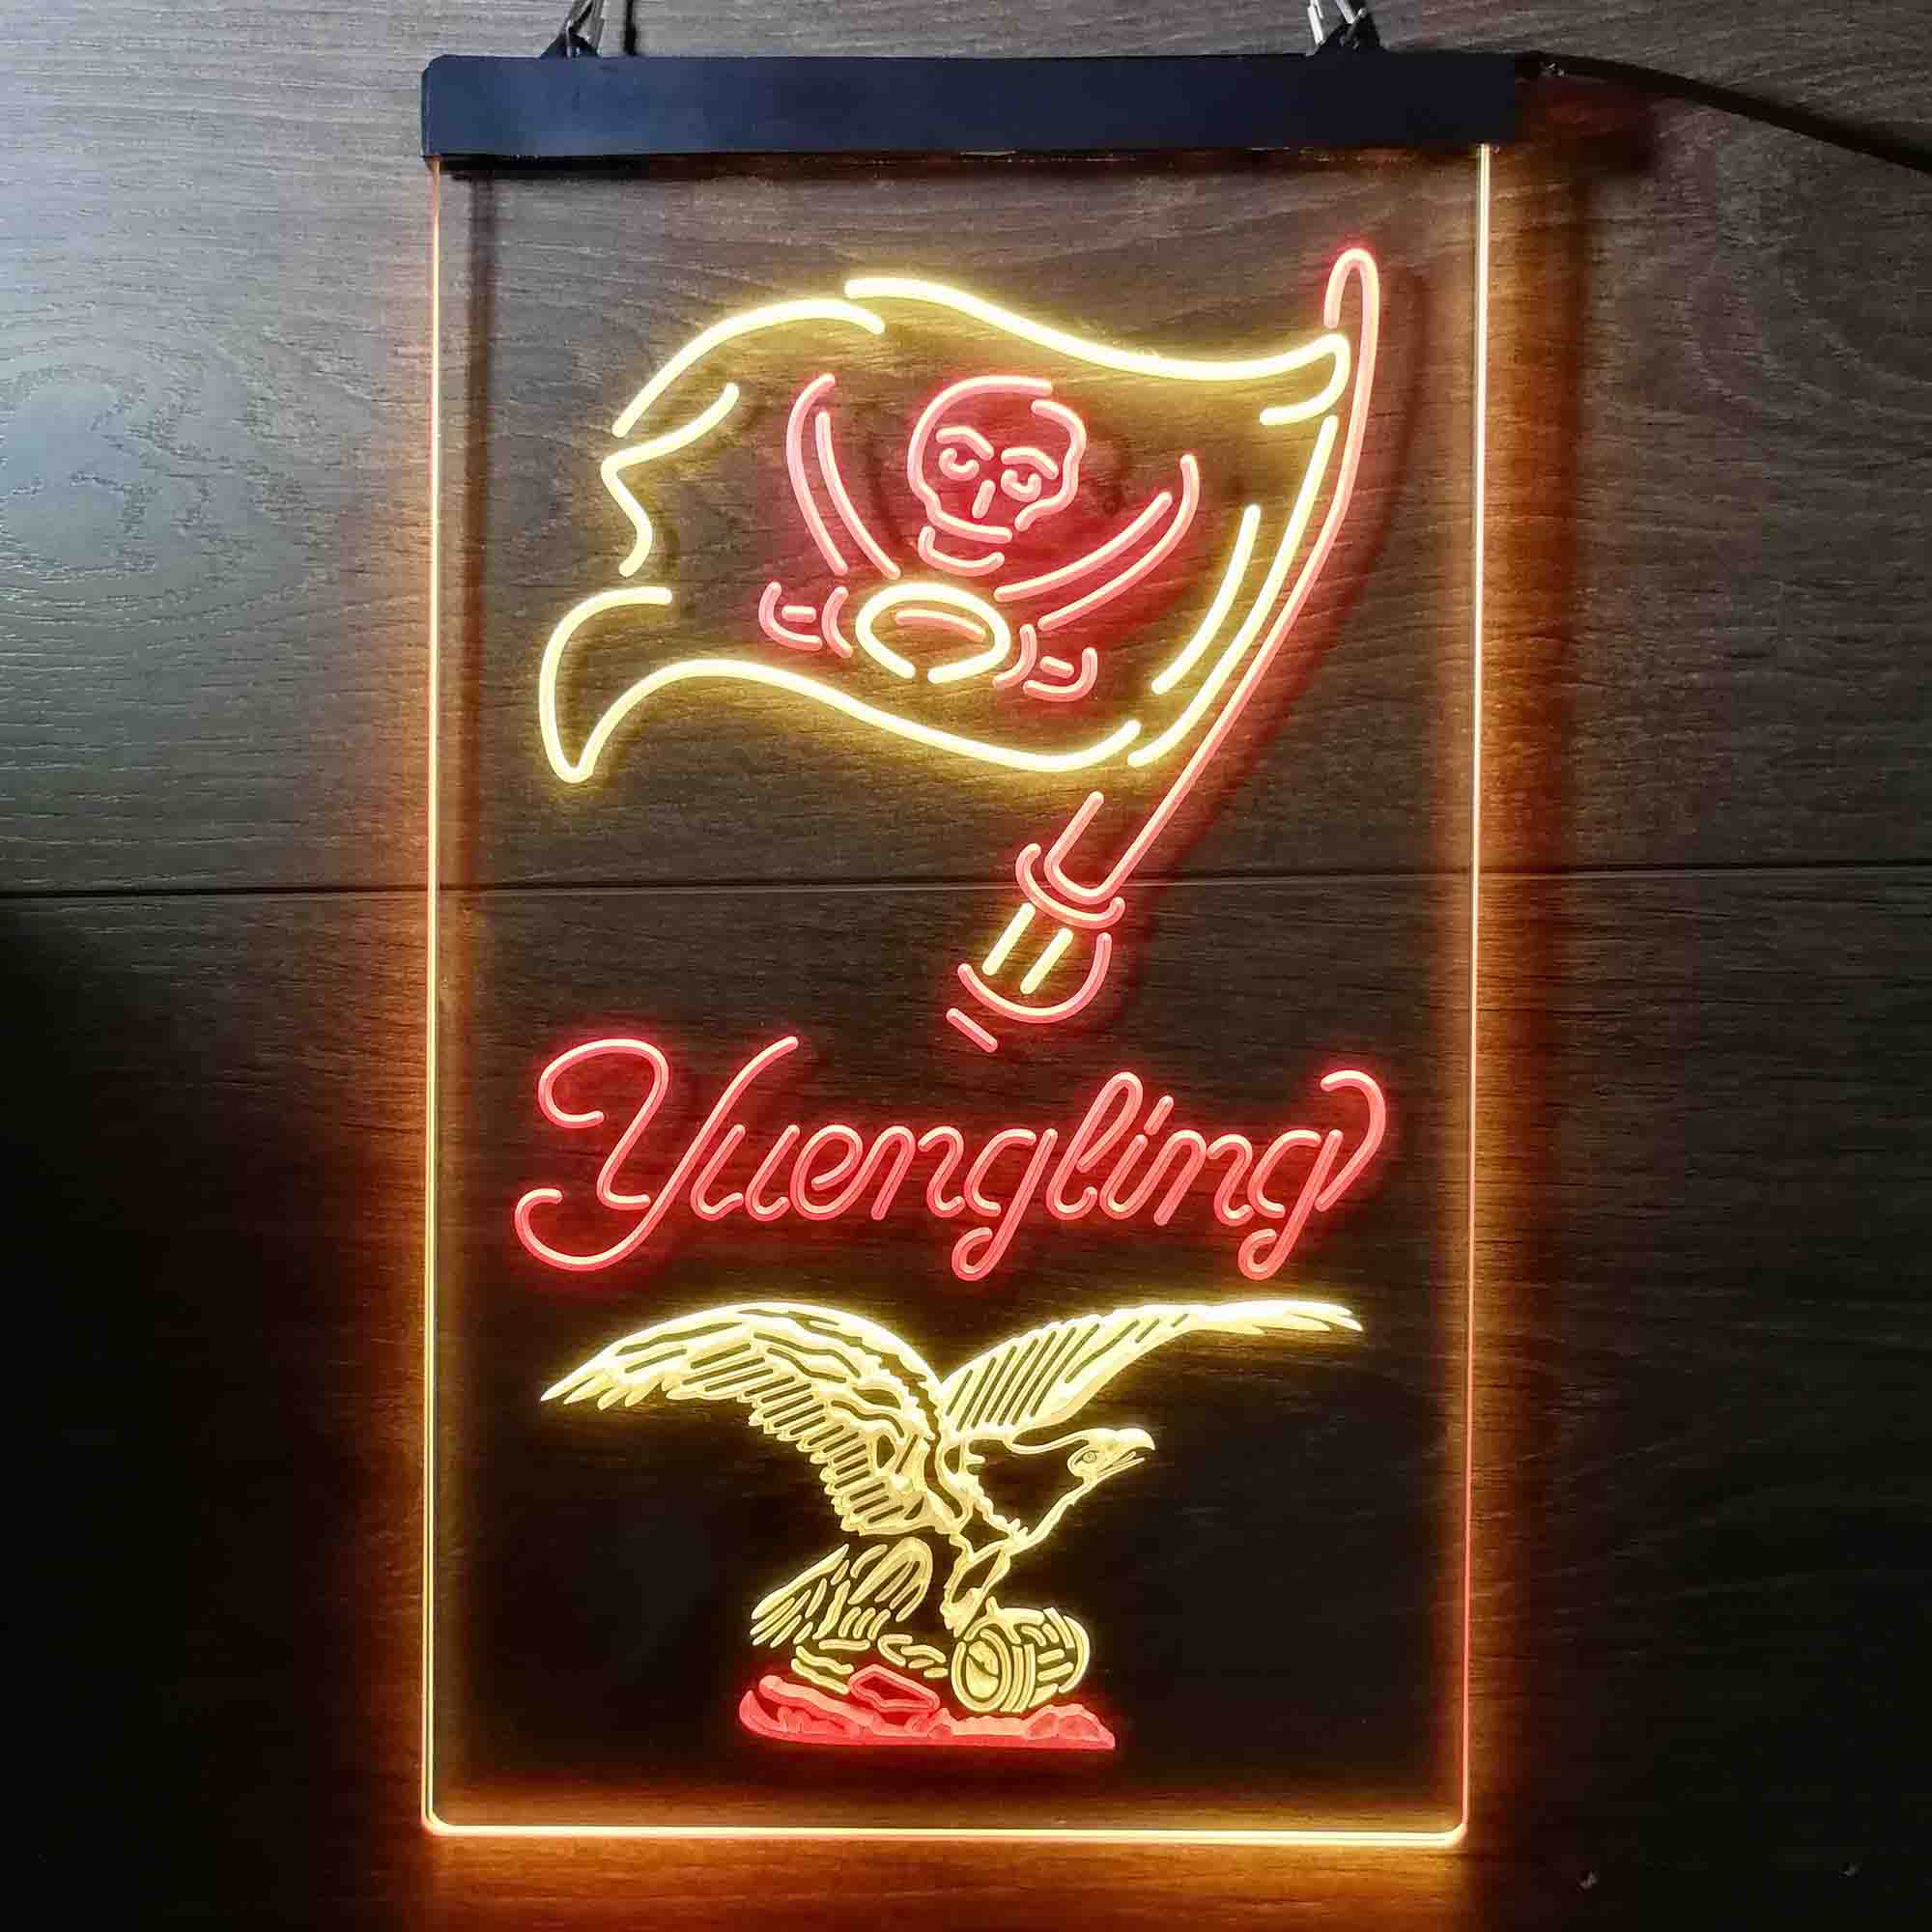 Yuengling Bar Tampa Bay Buccaneers Est. 1976 LED Neon Sign